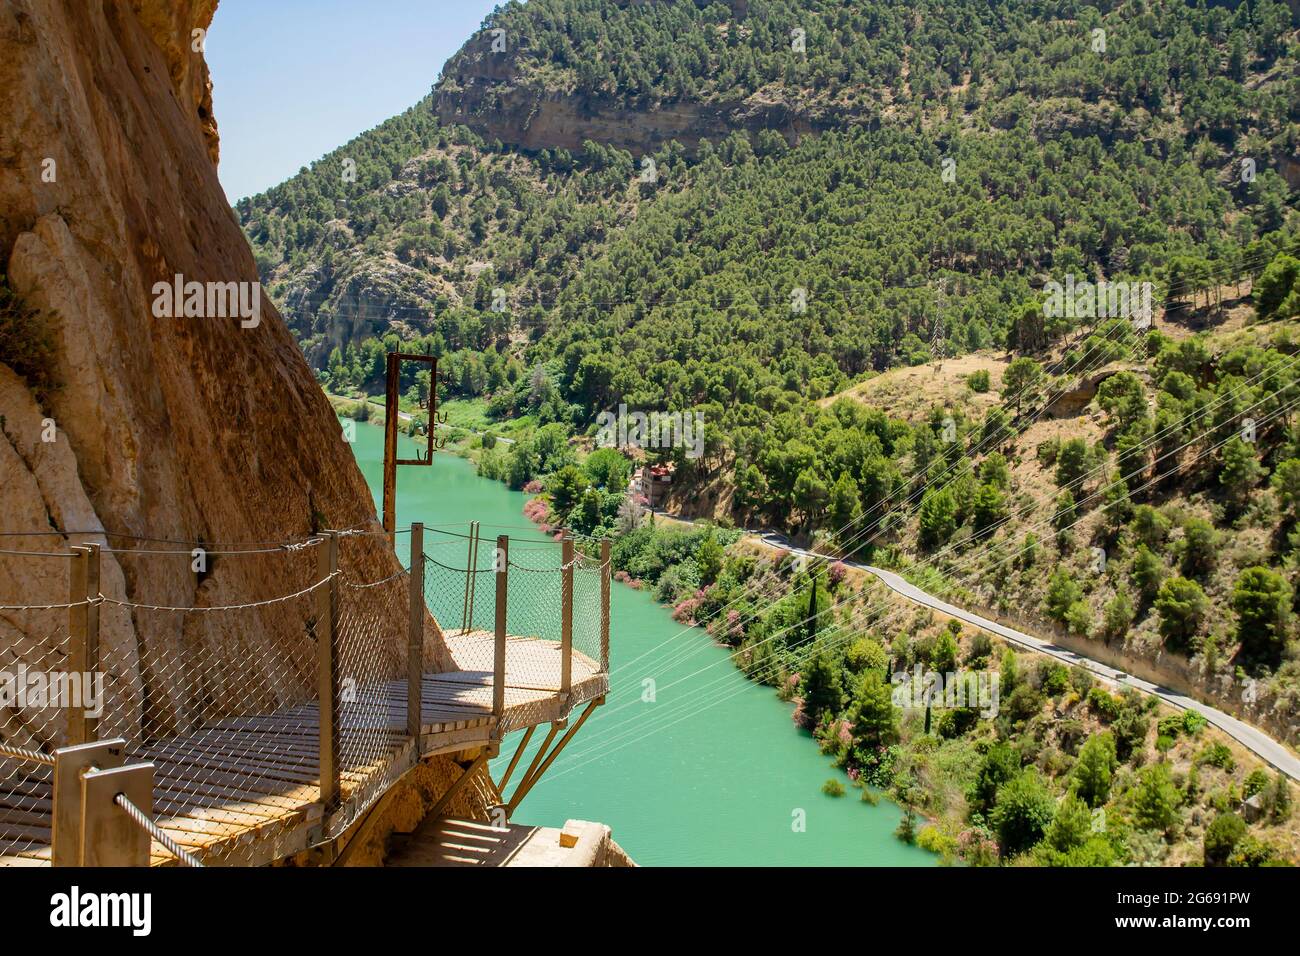 Caminito del Rey walkway in Gorge of the Gaitanes, Guadalhorce river canyon in Malaga, Spain. Stock Photo